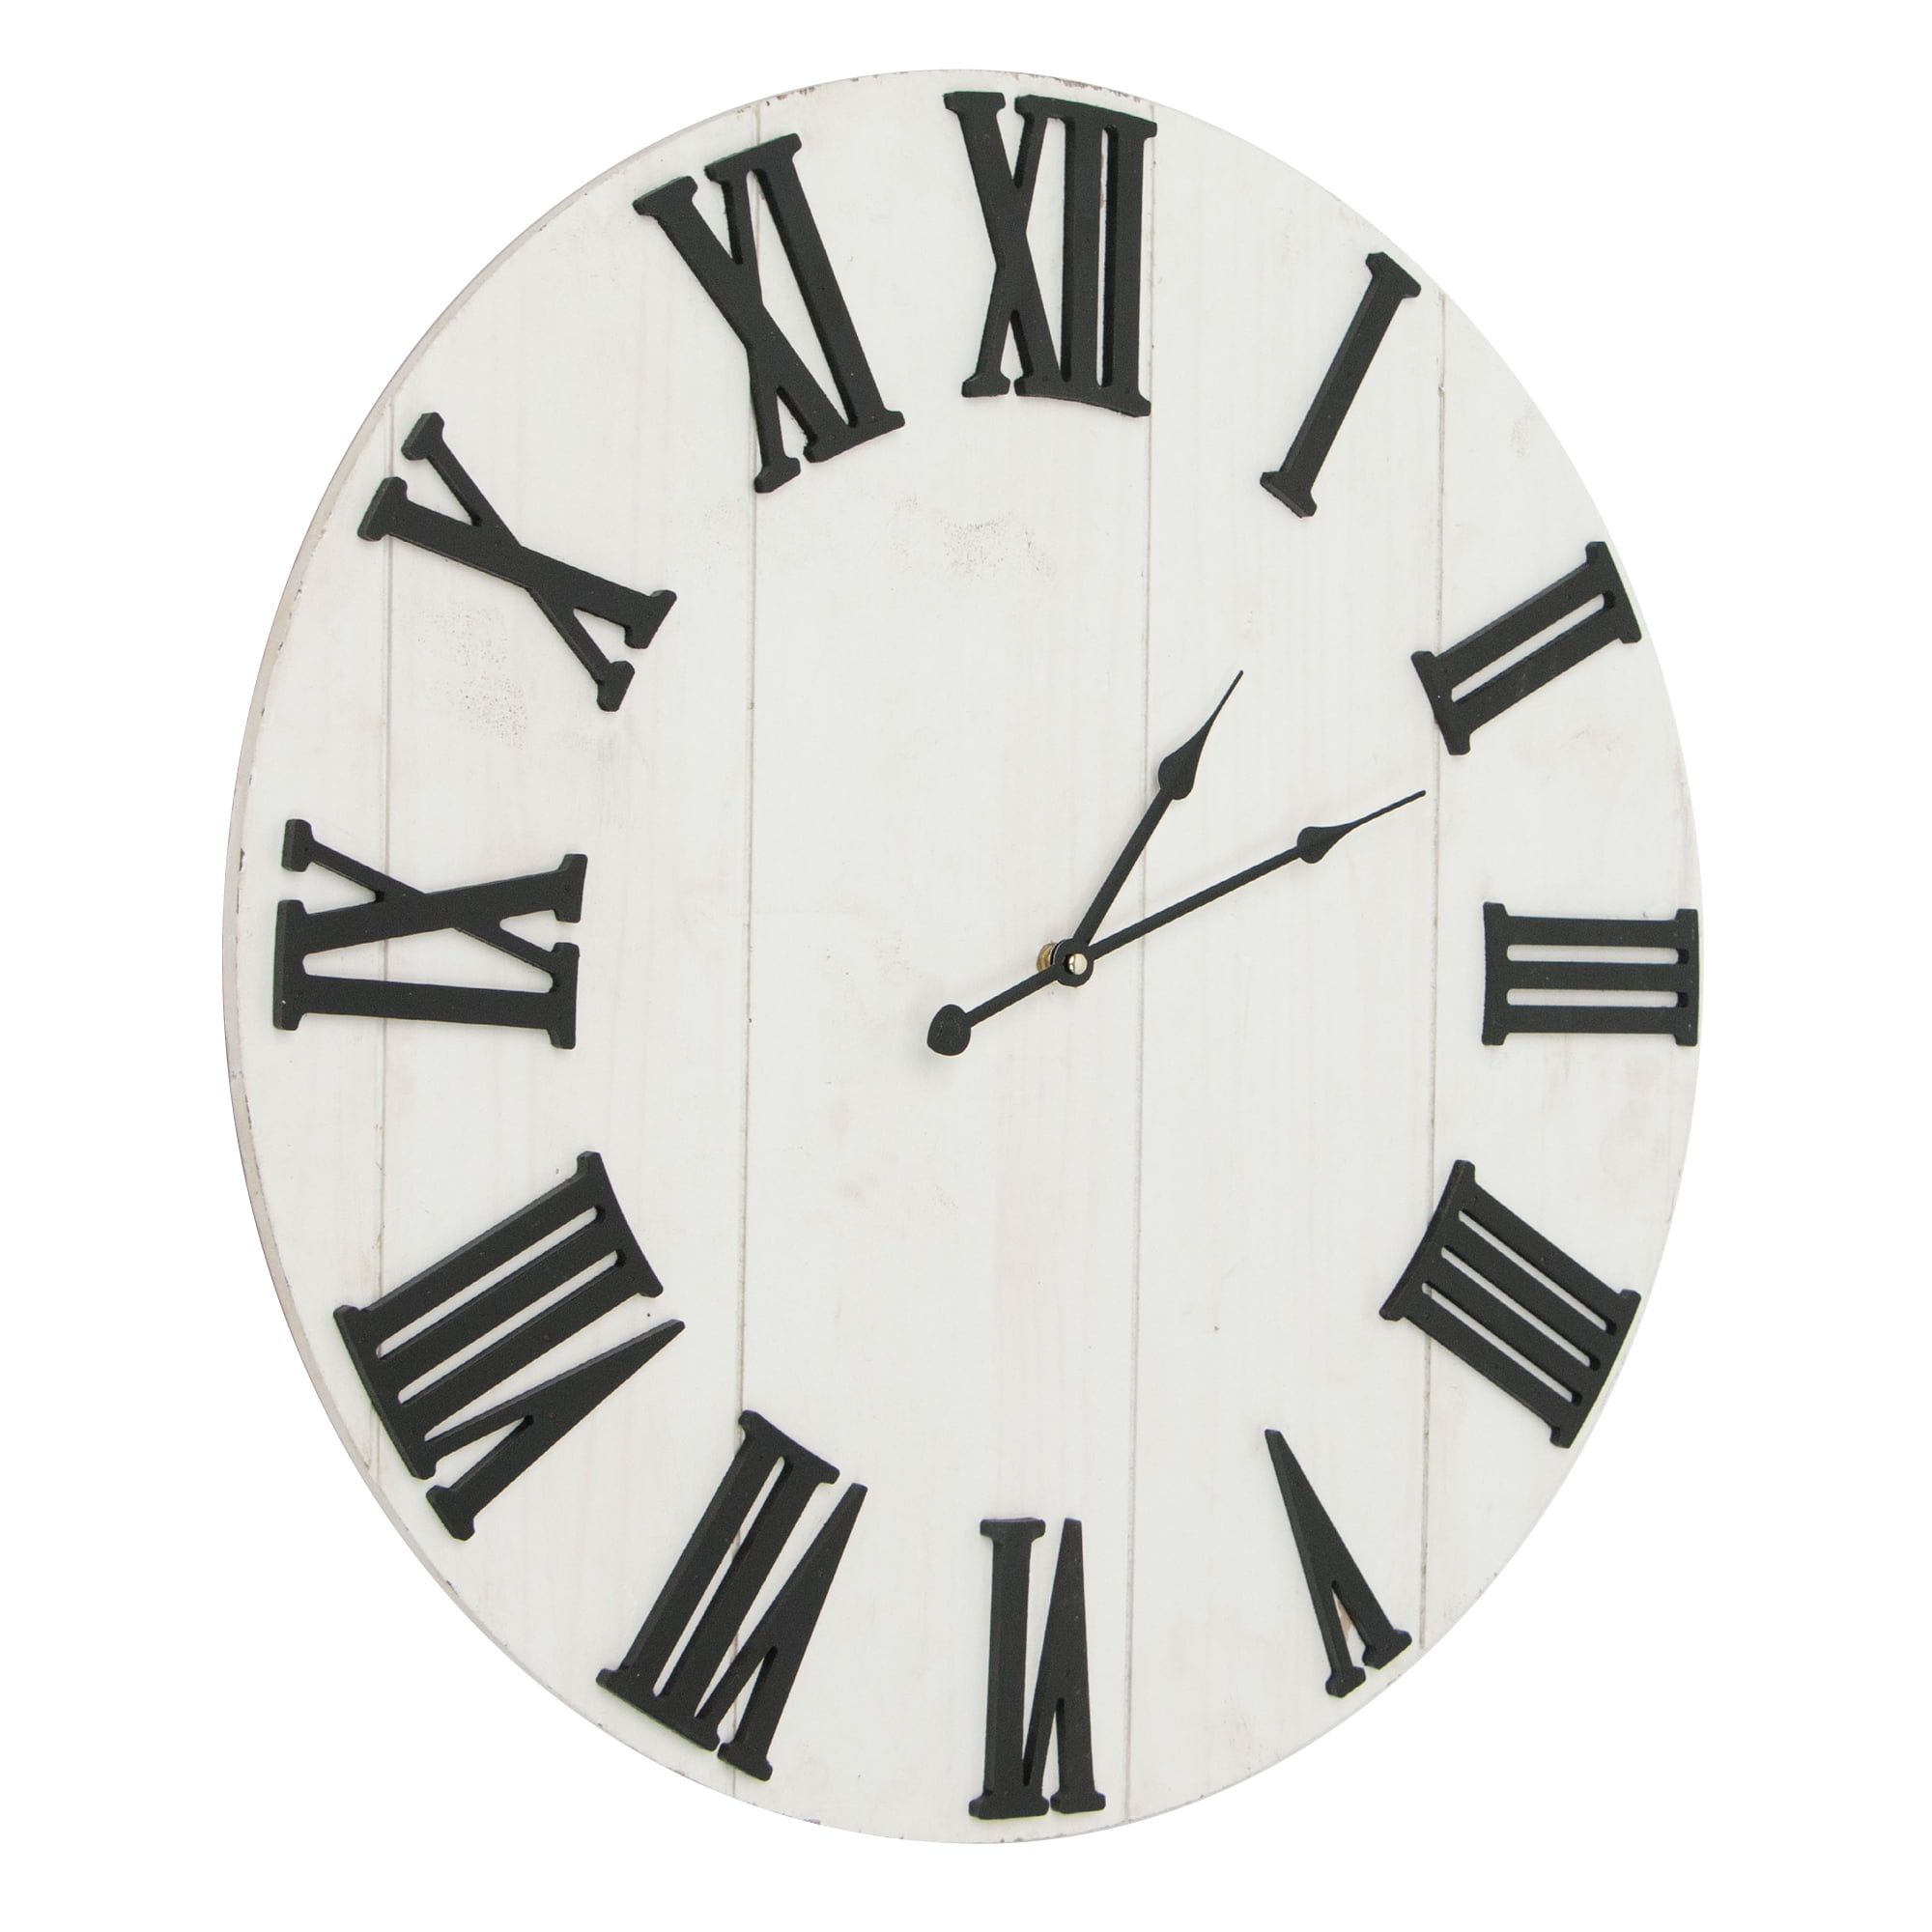 Wooden Roman Numeral Quartz Wall Clock Oversize Extra Large Giant Very Big Round 